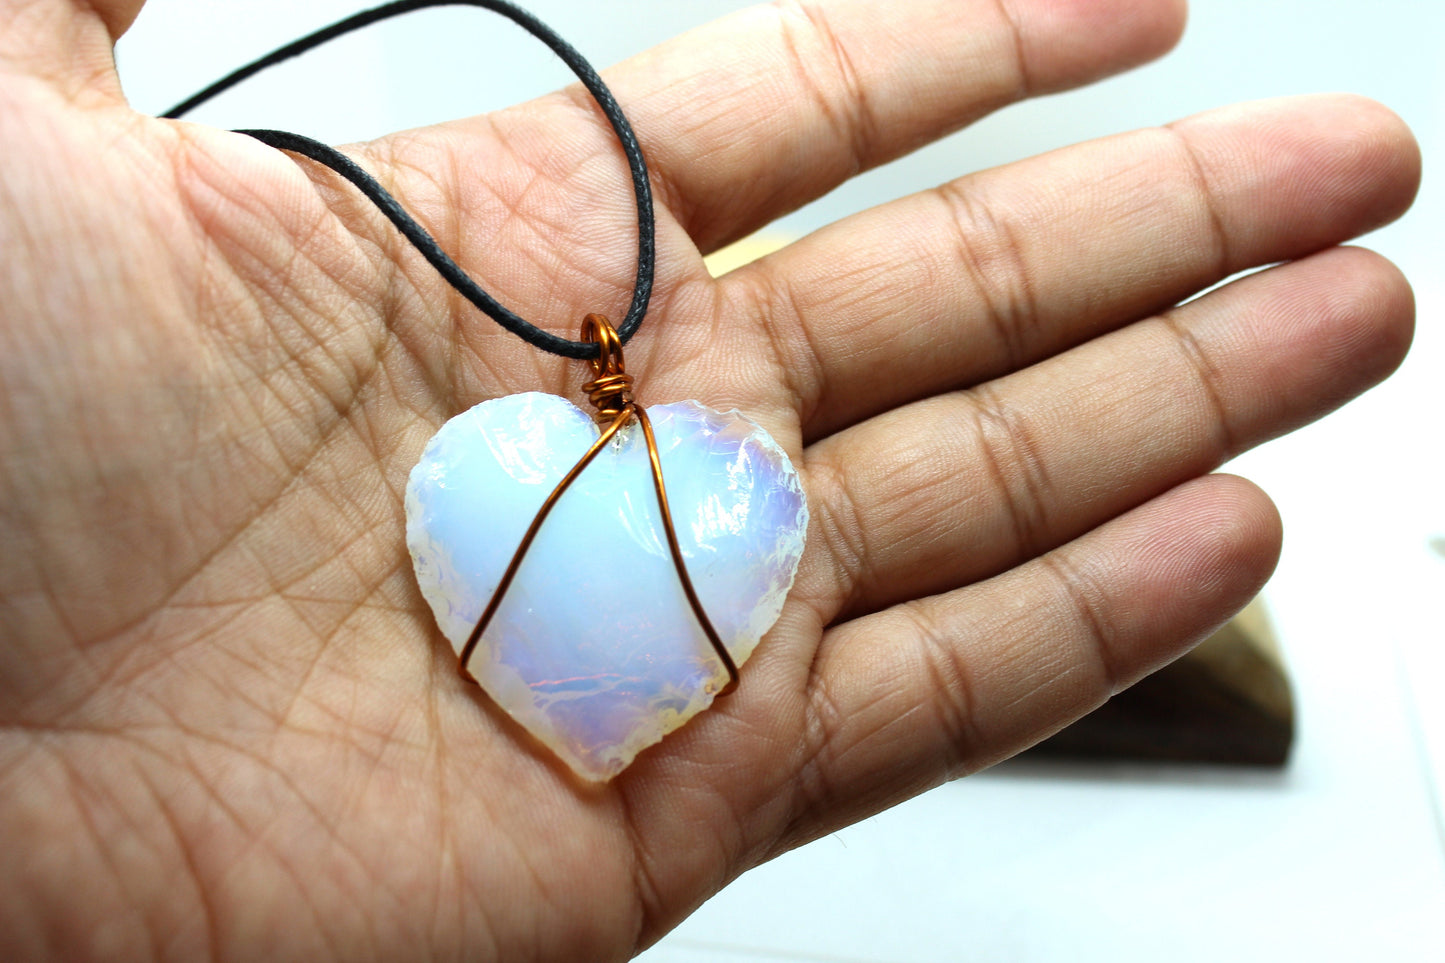 Opalite HEART Pendant, Opalite Crystal, Opalite Necklace, Wire Wrapped Copper Pendant, Boho Jewelry, Reiki Energy Charged Crystal pendant